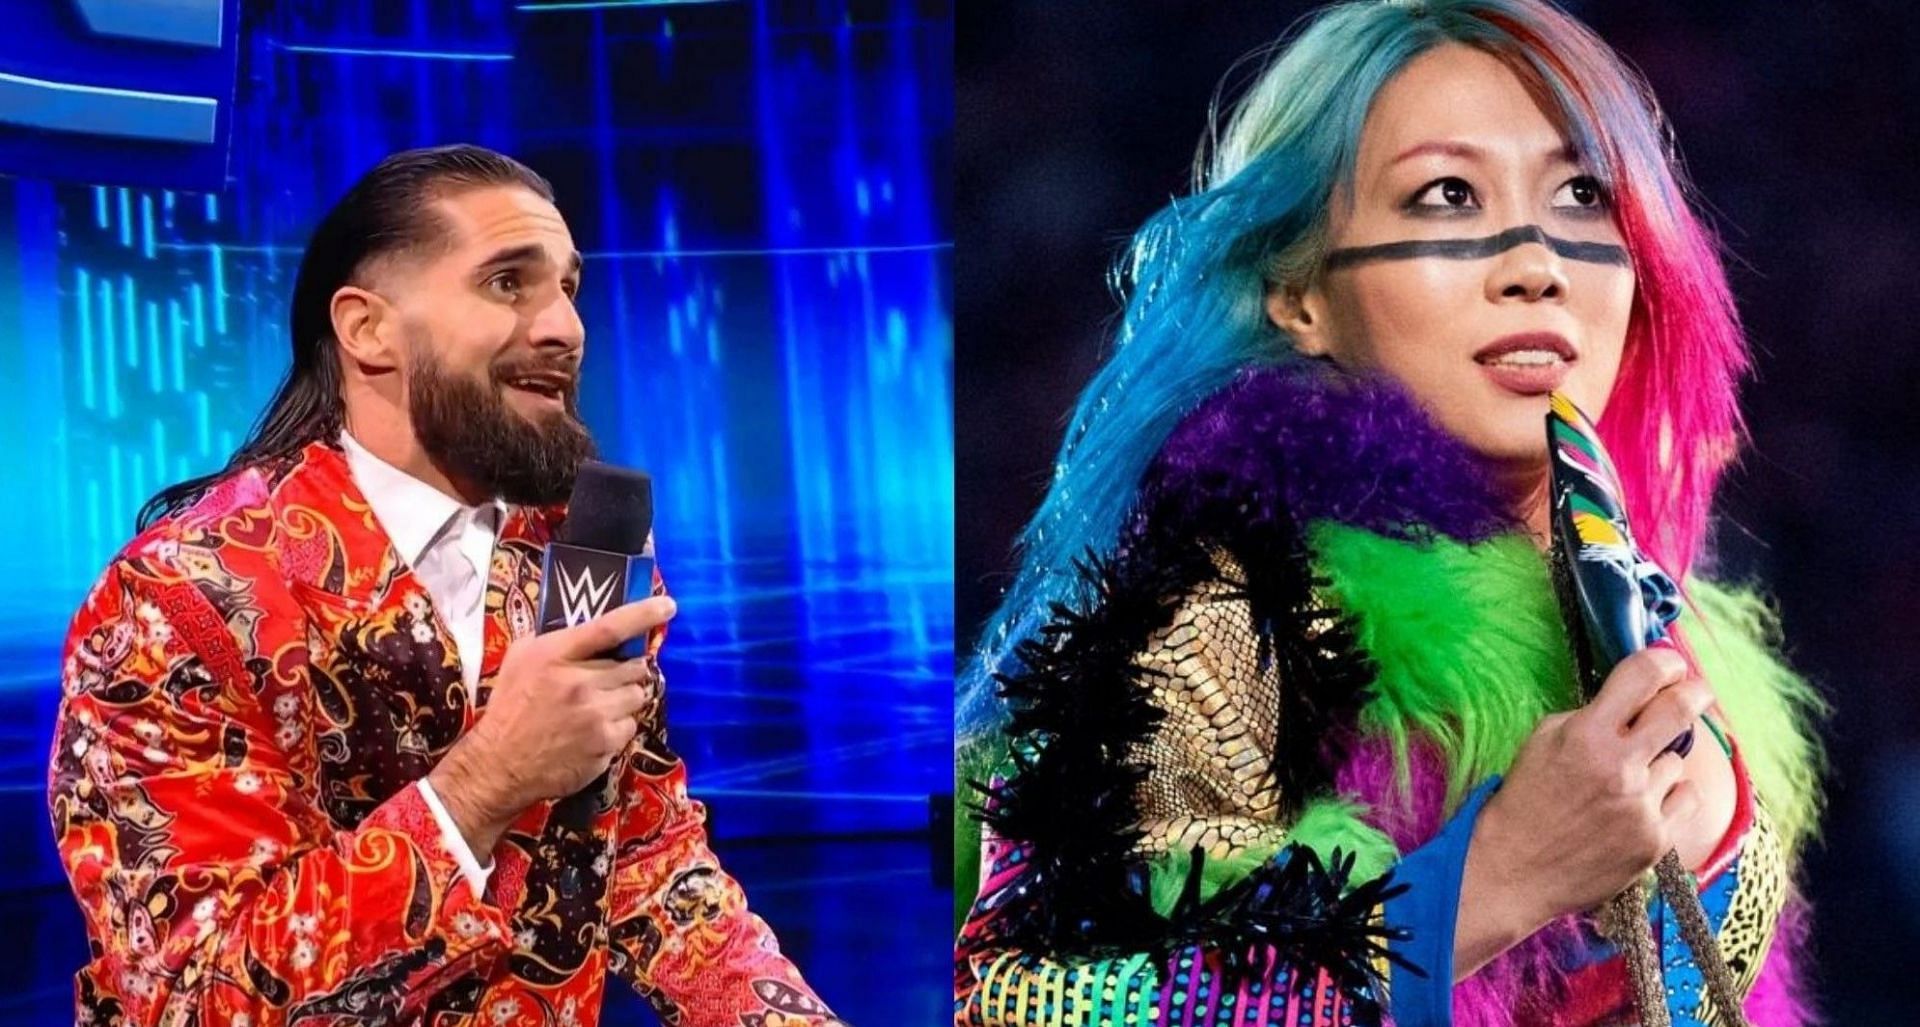 Seth Rollins and Asuka are two of the biggest stars in WWE at the moment